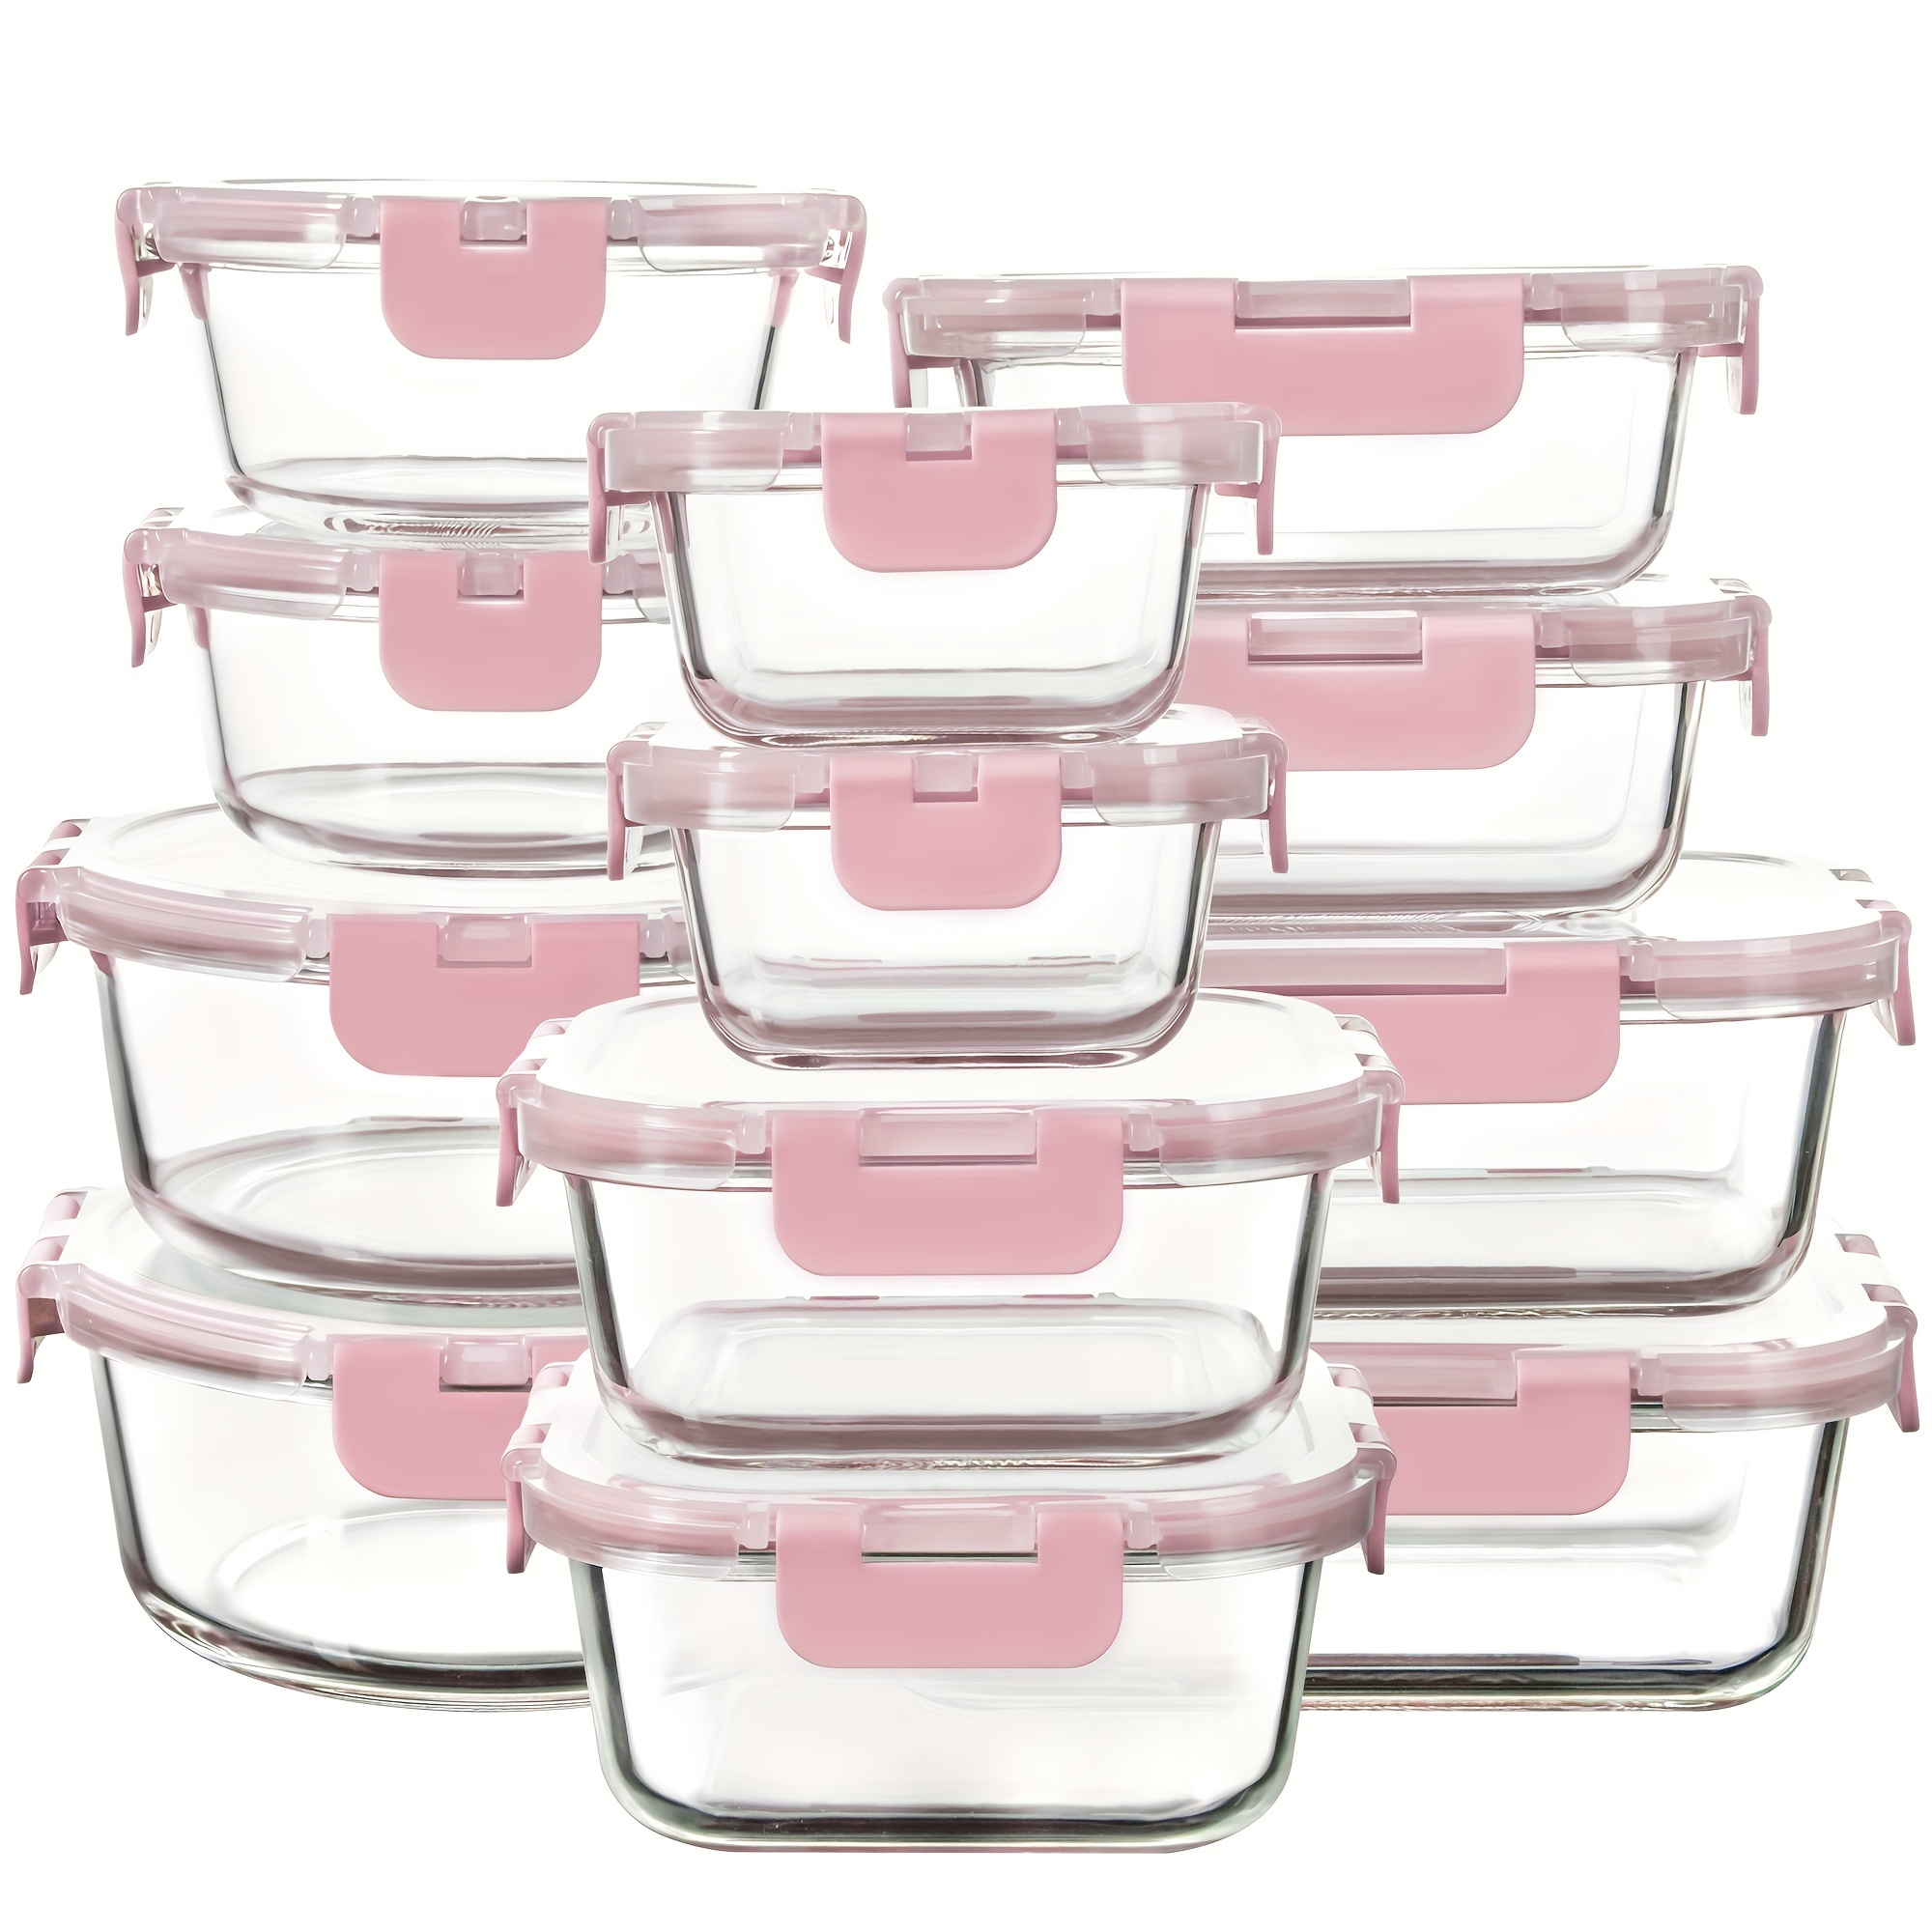 

24pcs (12 +12 Lids), Glass Storage Containers With Lids, High Borosilicate Glass Meal Prep Containers, Dishwasher/microwave/freezer Safe Glass Food Storage Containers For Leftovers, To Go, Leak-proof